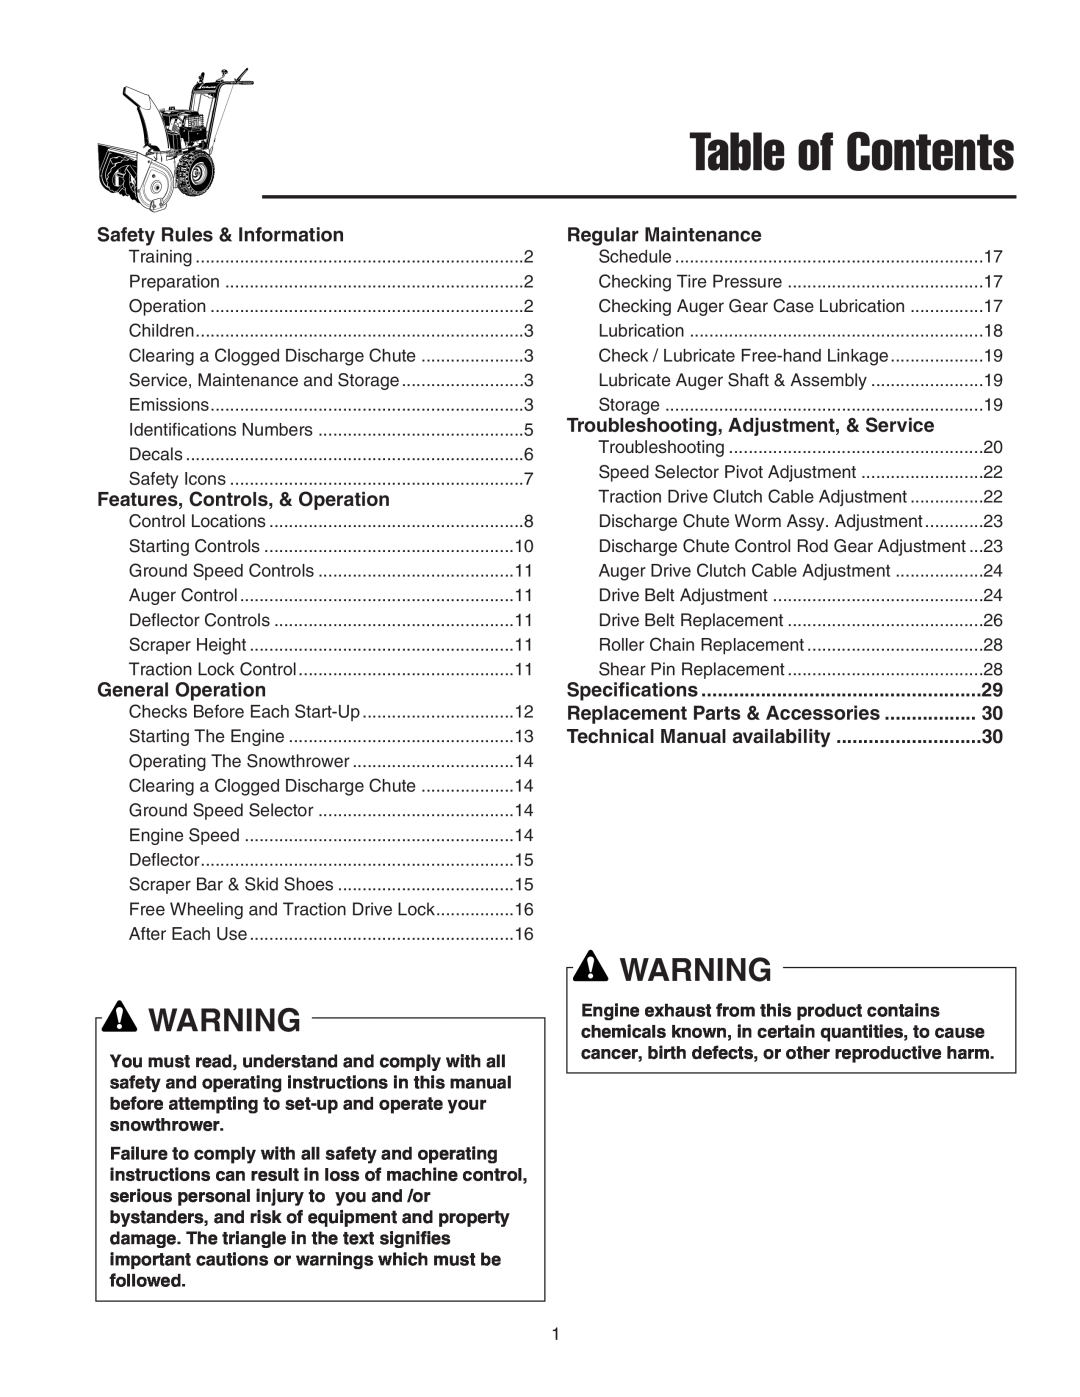 Snapper 555 Table of Contents, Safety Rules & Information, Regular Maintenance, Troubleshooting, Adjustment, & Service 